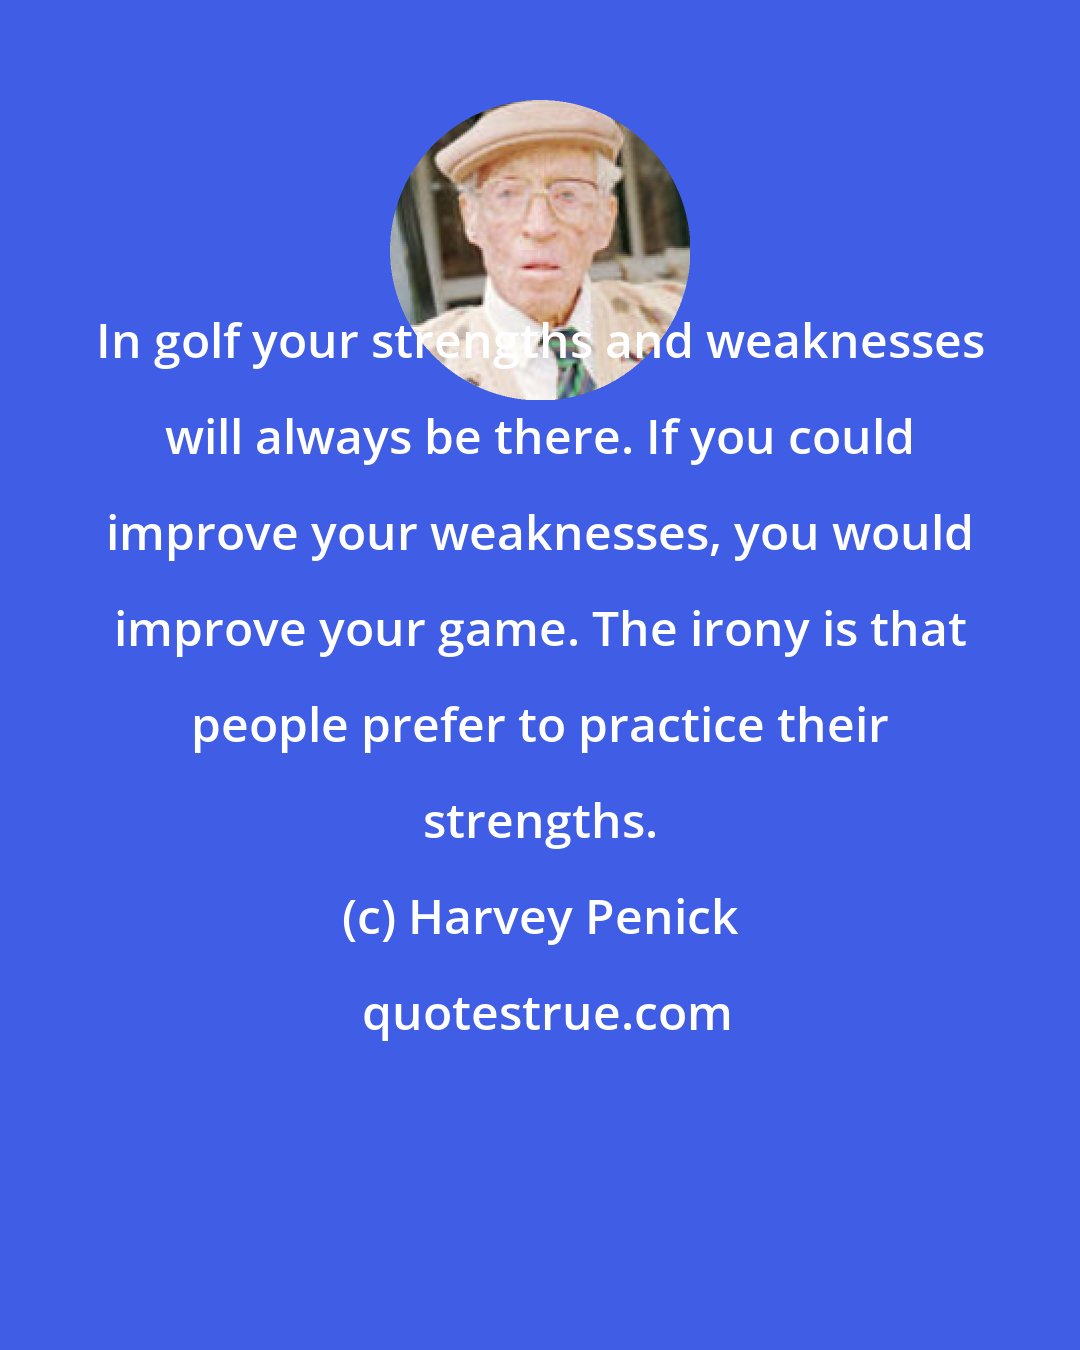 Harvey Penick: In golf your strengths and weaknesses will always be there. If you could improve your weaknesses, you would improve your game. The irony is that people prefer to practice their strengths.